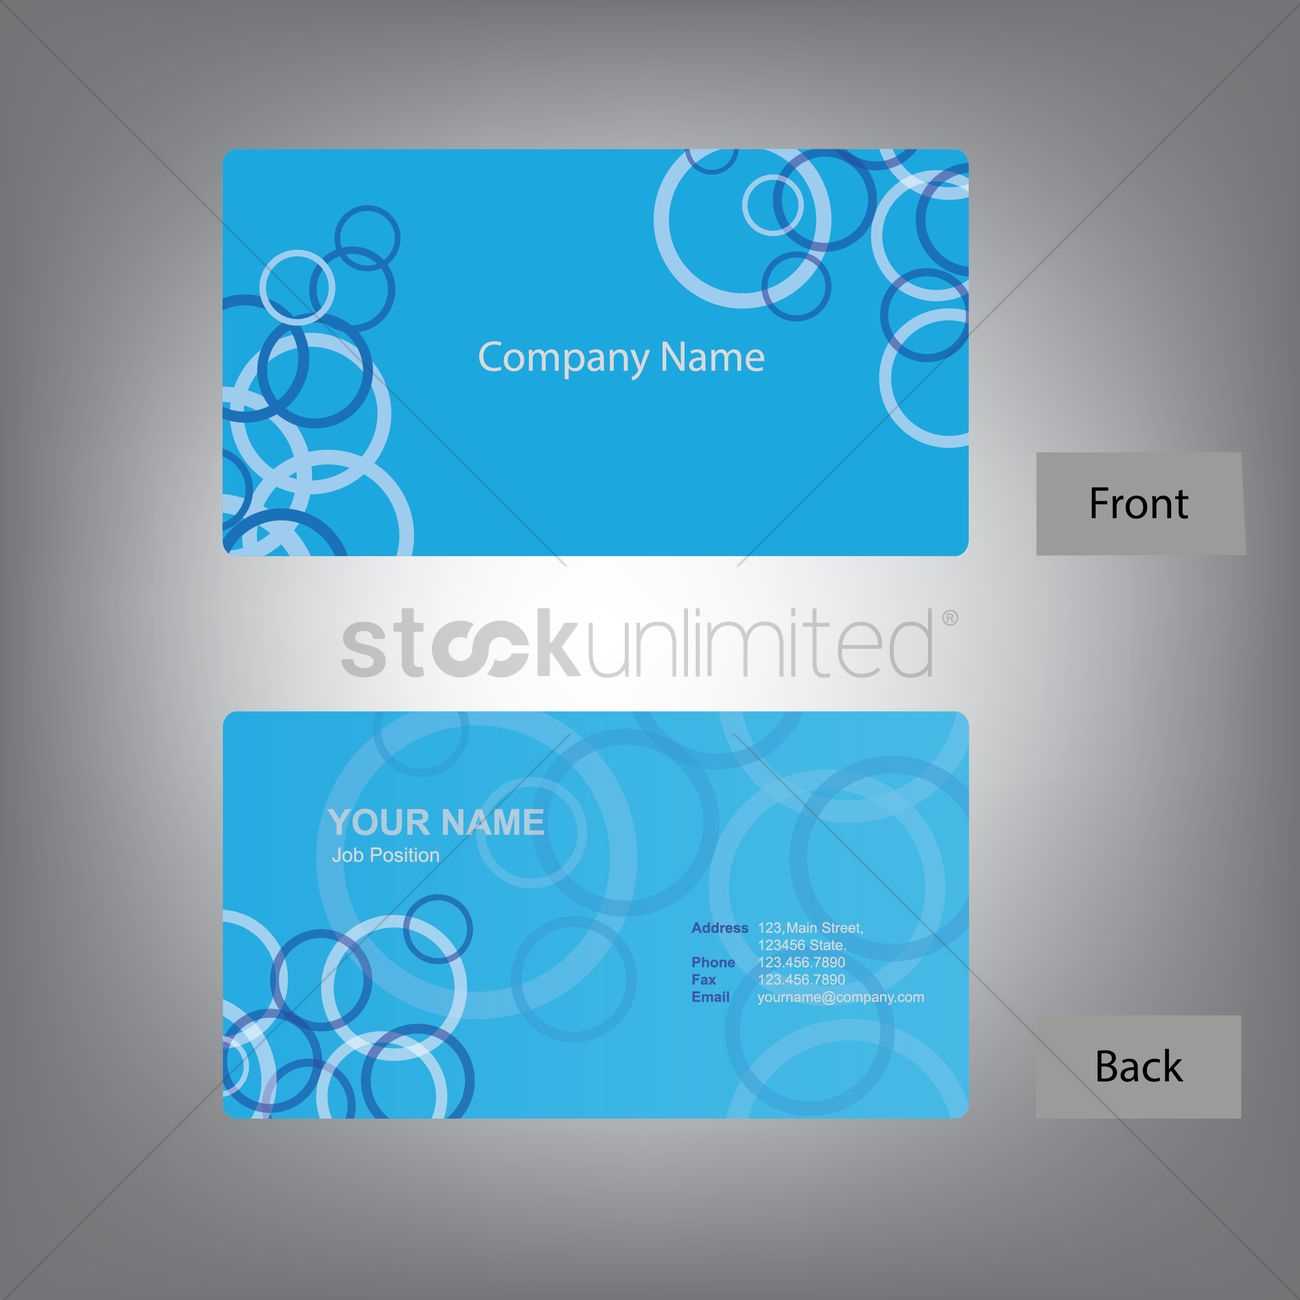 Front And Back Business Card Template Word ] - Card Template Throughout Front And Back Business Card Template Word